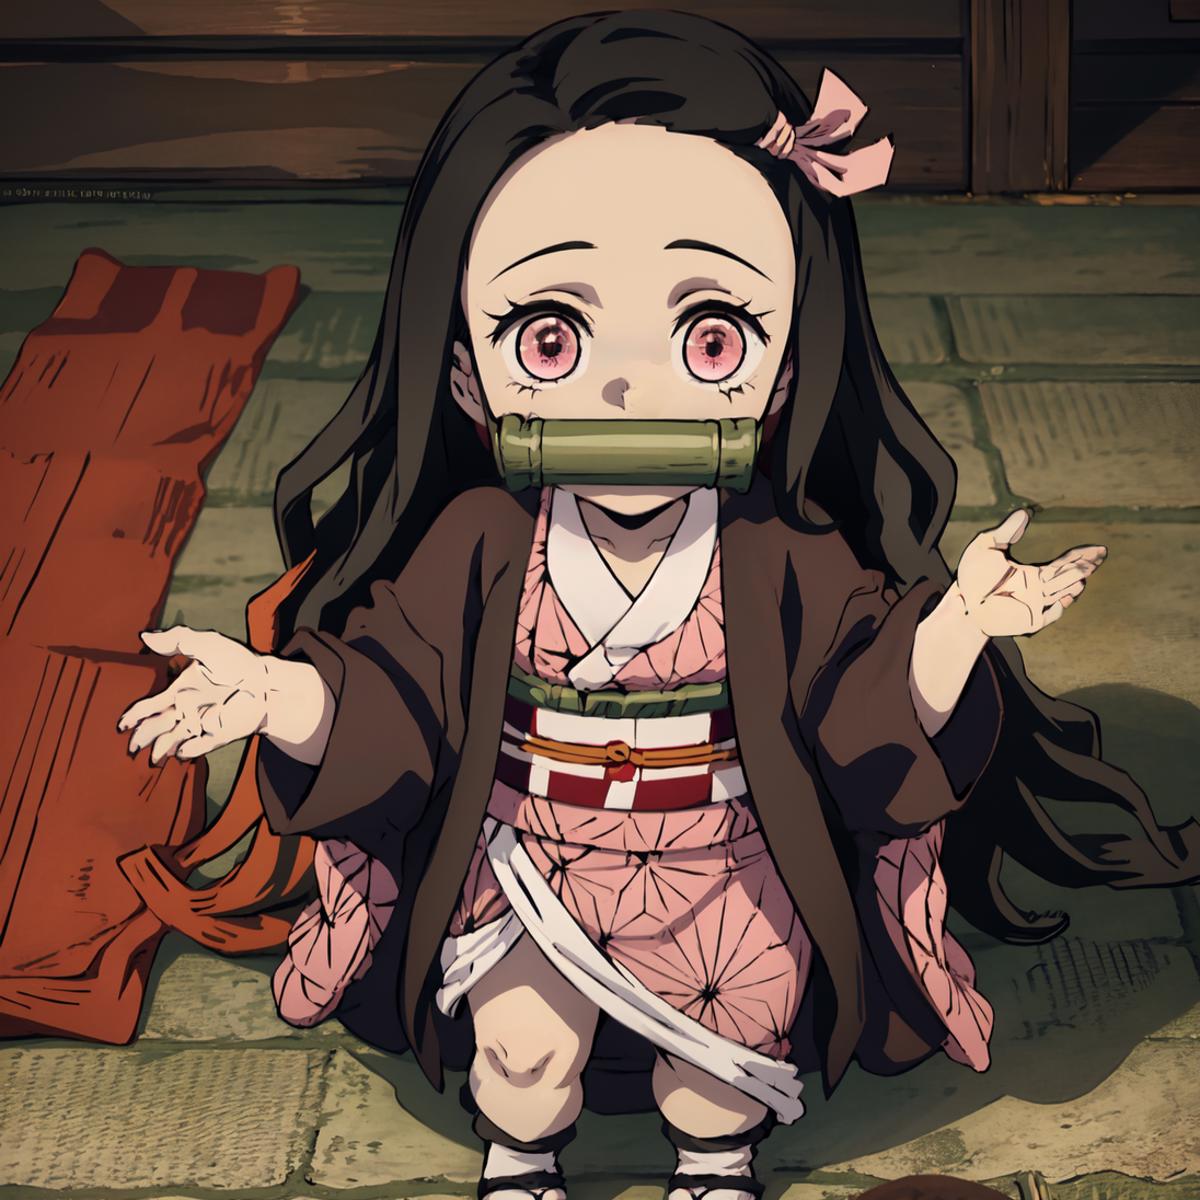 A young girl wearing a kimono with a pink bow is sitting on the ground and holding her mouth with a green cloth.